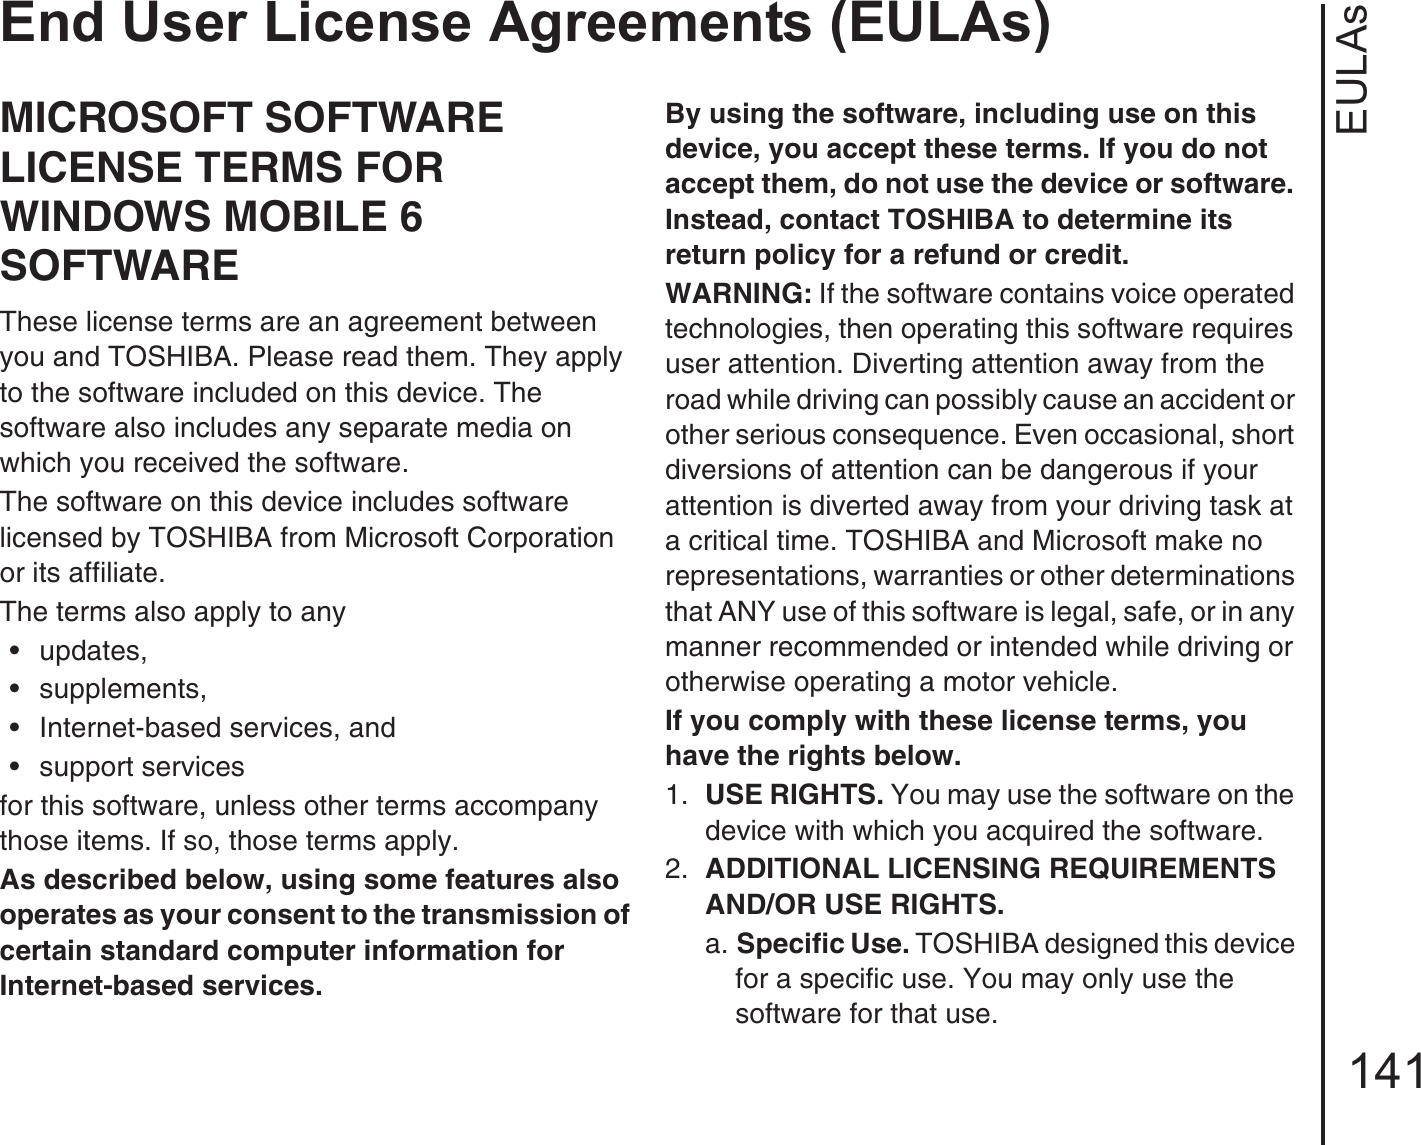 EULAsEnd User License Agreements (EULAs)141End User License Agreements (EULAs)MICROSOFT SOFTWARE LICENSE TERMS FOR WINDOWS MOBILE 6 SOFTWAREThese license terms are an agreement between you and TOSHIBA. Please read them. They apply to the software included on this device. The software also includes any separate media on which you received the software.The software on this device includes software licensed by TOSHIBA from Microsoft Corporation or its affiliate.The terms also apply to any • updates, • supplements, • Internet-based services, and• support servicesfor this software, unless other terms accompany those items. If so, those terms apply. As described below, using some features also operates as your consent to the transmission of certain standard computer information for Internet-based services.By using the software, including use on this device, you accept these terms. If you do not accept them, do not use the device or software. Instead, contact TOSHIBA to determine its return policy for a refund or credit.WARNING: If the software contains voice operated technologies, then operating this software requires user attention. Diverting attention away from the road while driving can possibly cause an accident or other serious consequence. Even occasional, short diversions of attention can be dangerous if your attention is diverted away from your driving task at a critical time. TOSHIBA and Microsoft make no representations, warranties or other determinations that ANY use of this software is legal, safe, or in any manner recommended or intended while driving or otherwise operating a motor vehicle. If you comply with these license terms, you have the rights below.1.  USE RIGHTS. You may use the software on the device with which you acquired the software.2.  ADDITIONAL LICENSING REQUIREMENTS AND/OR USE RIGHTS. a. Specific Use. TOSHIBA designed this device for a specific use. You may only use the software for that use.